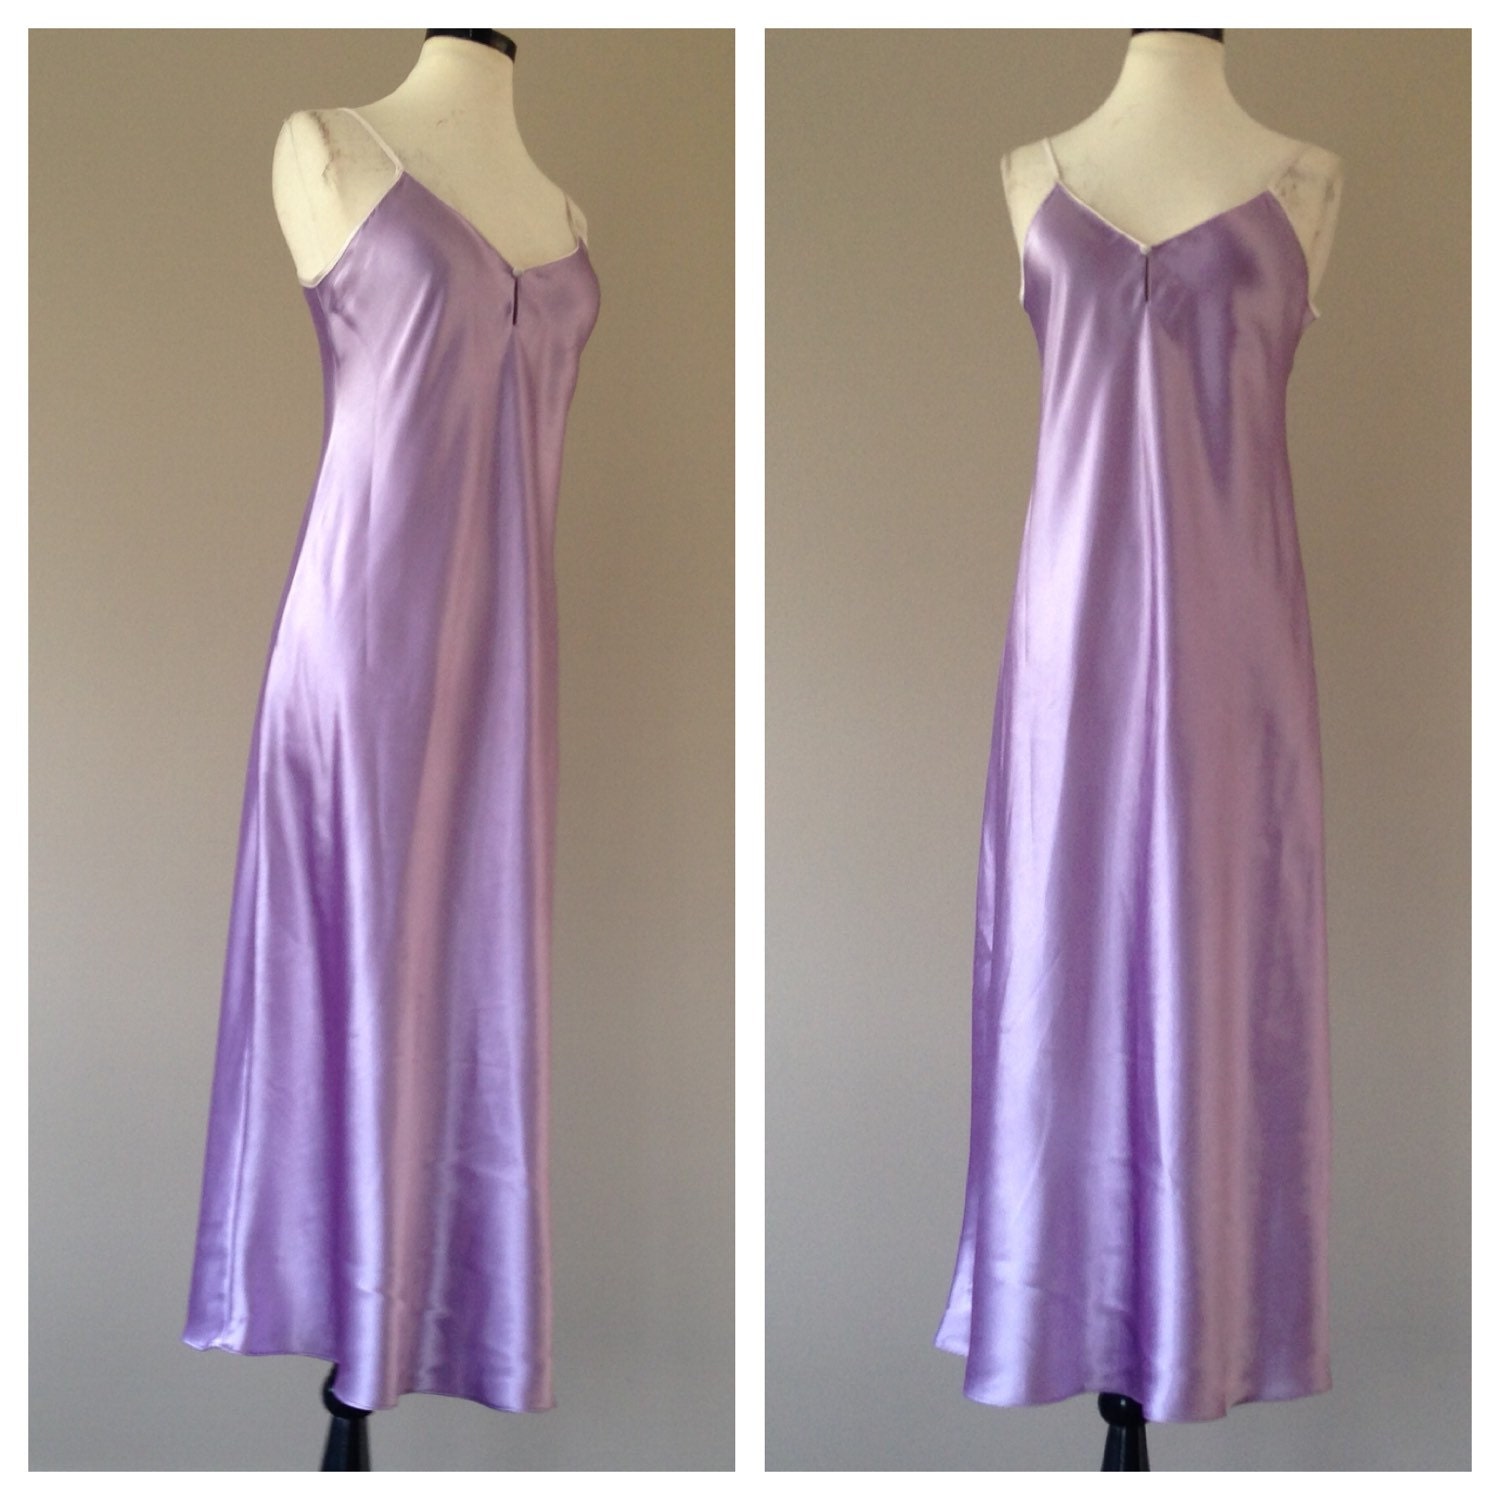 satin nightgown lingerie / long purple night gown / by LustNLux